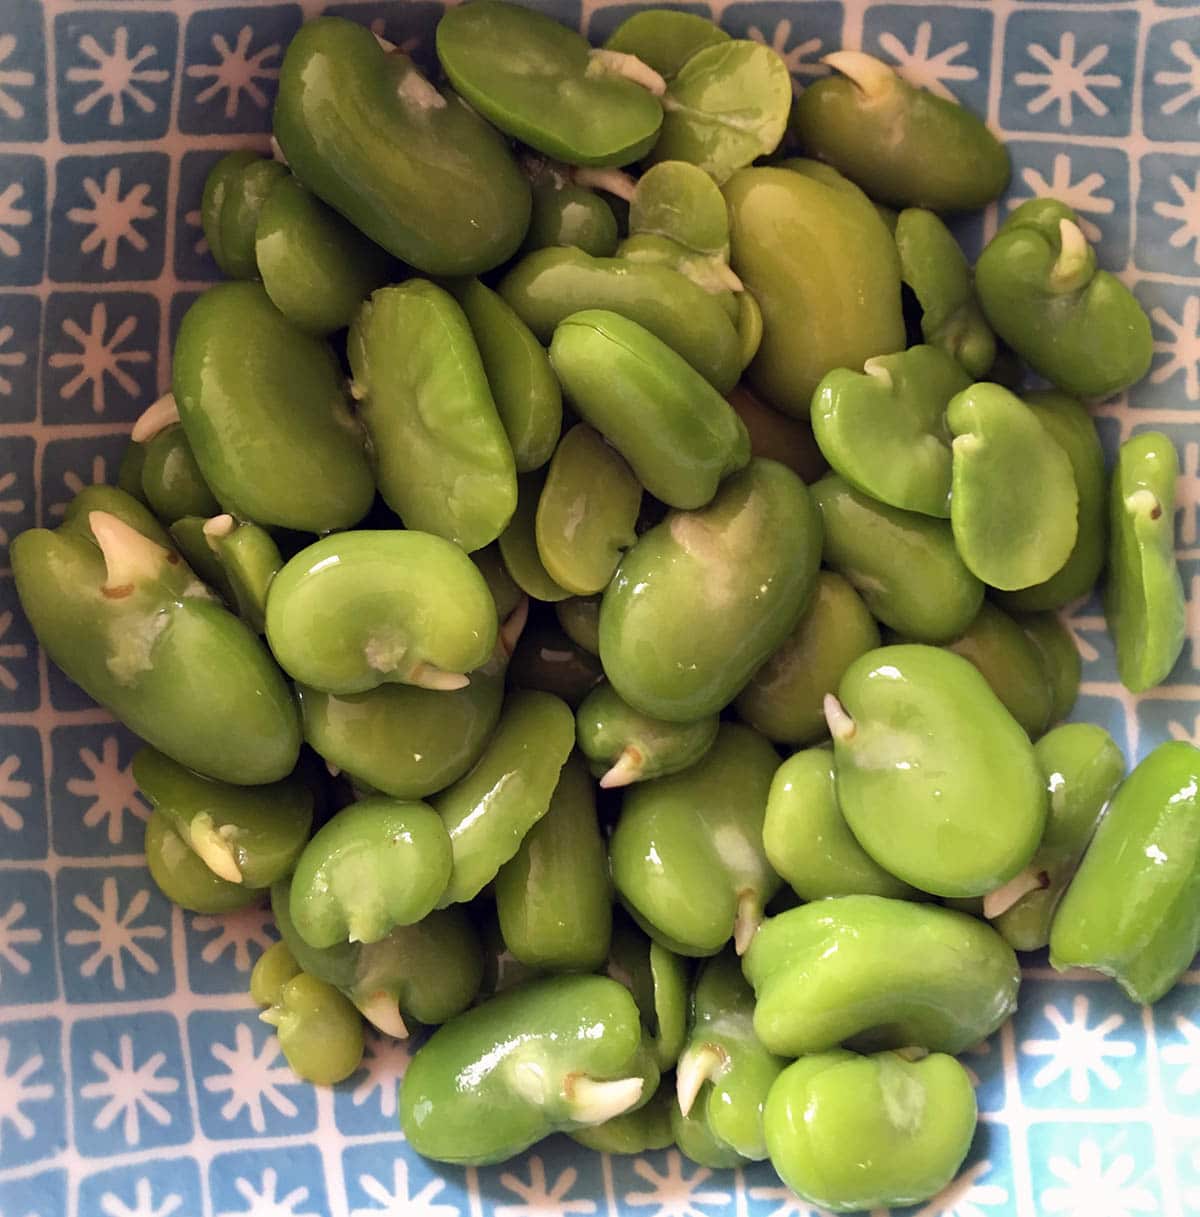 How To Prepare And Cook Broad Beans Sneaky Veg